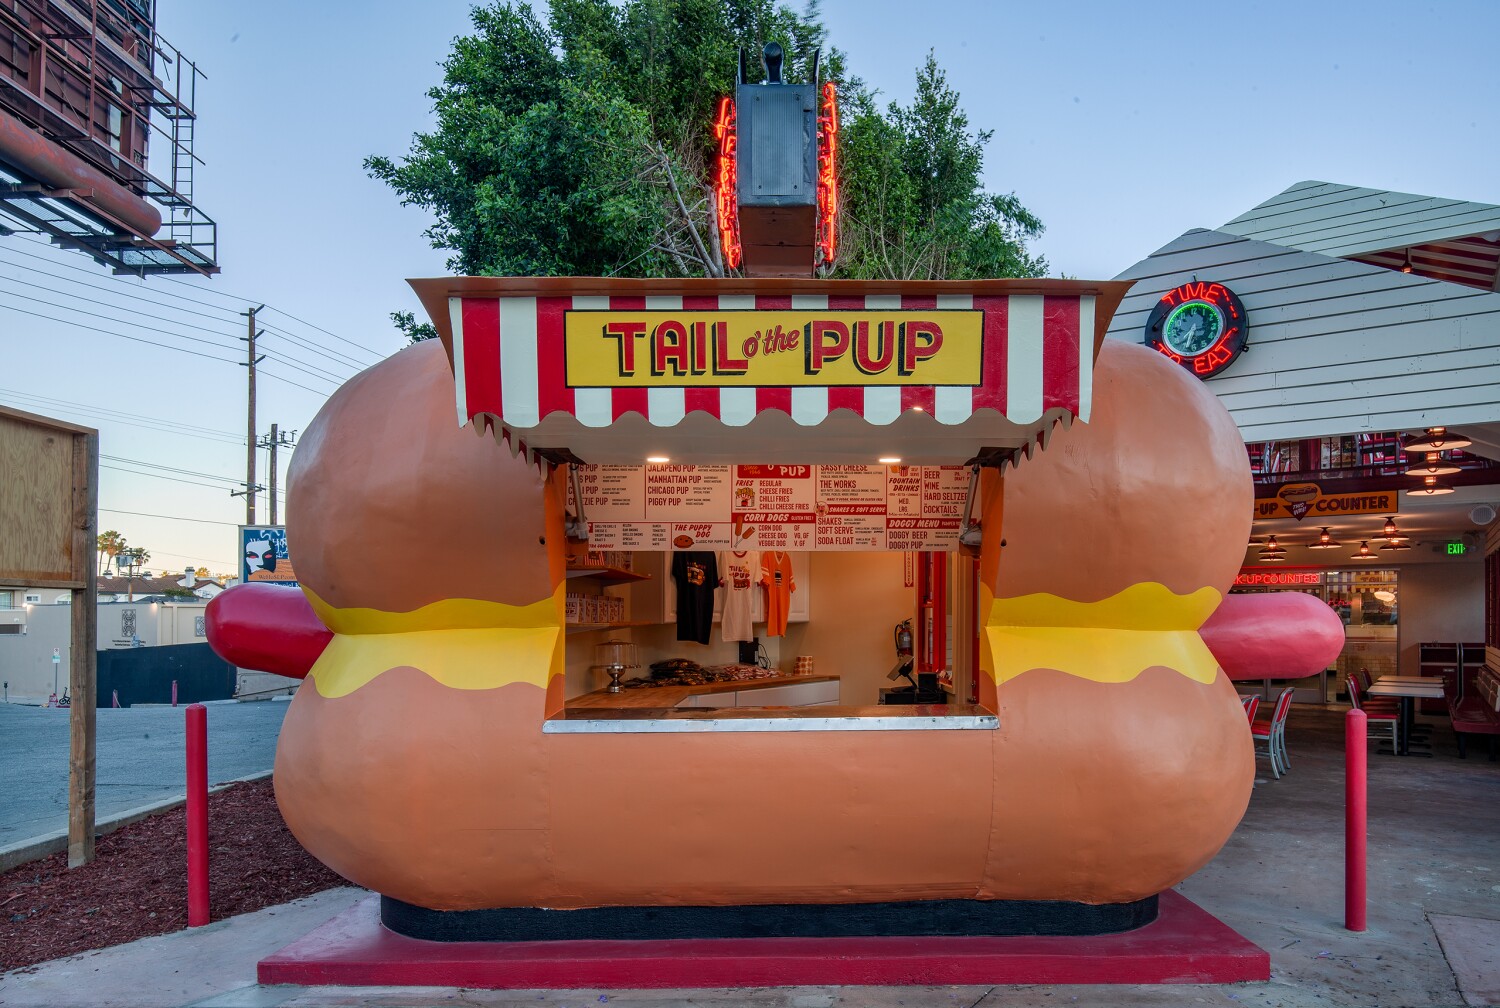 Iconic hot dog-shaped stand Tail o' the Pup makes a comeback